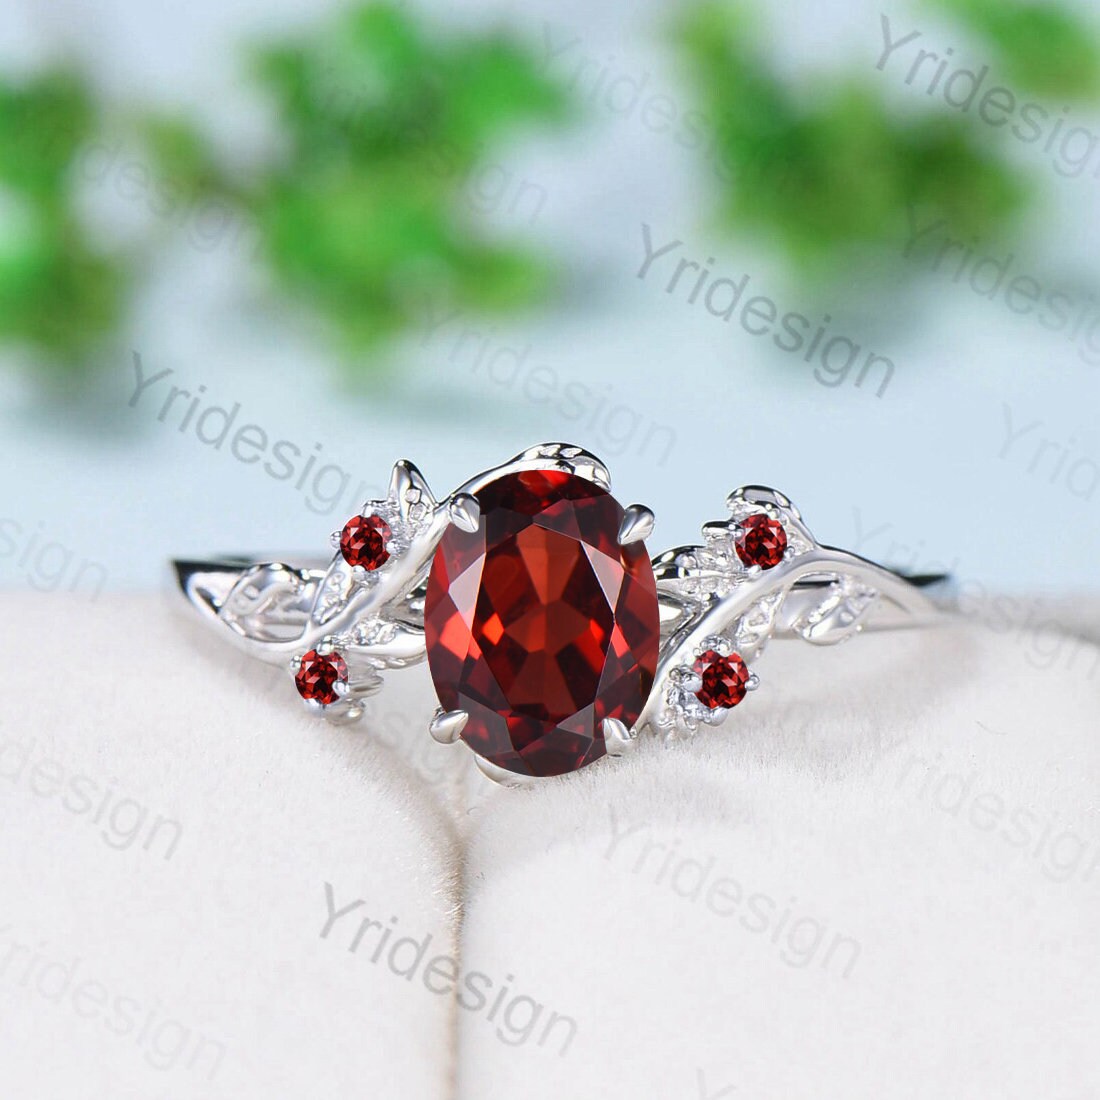 Nature Inspired natural garnet ring cluster Leaf engagement ring women unique branch wedding ring January Birthstone Jewelry Proposal Gift - PENFINE